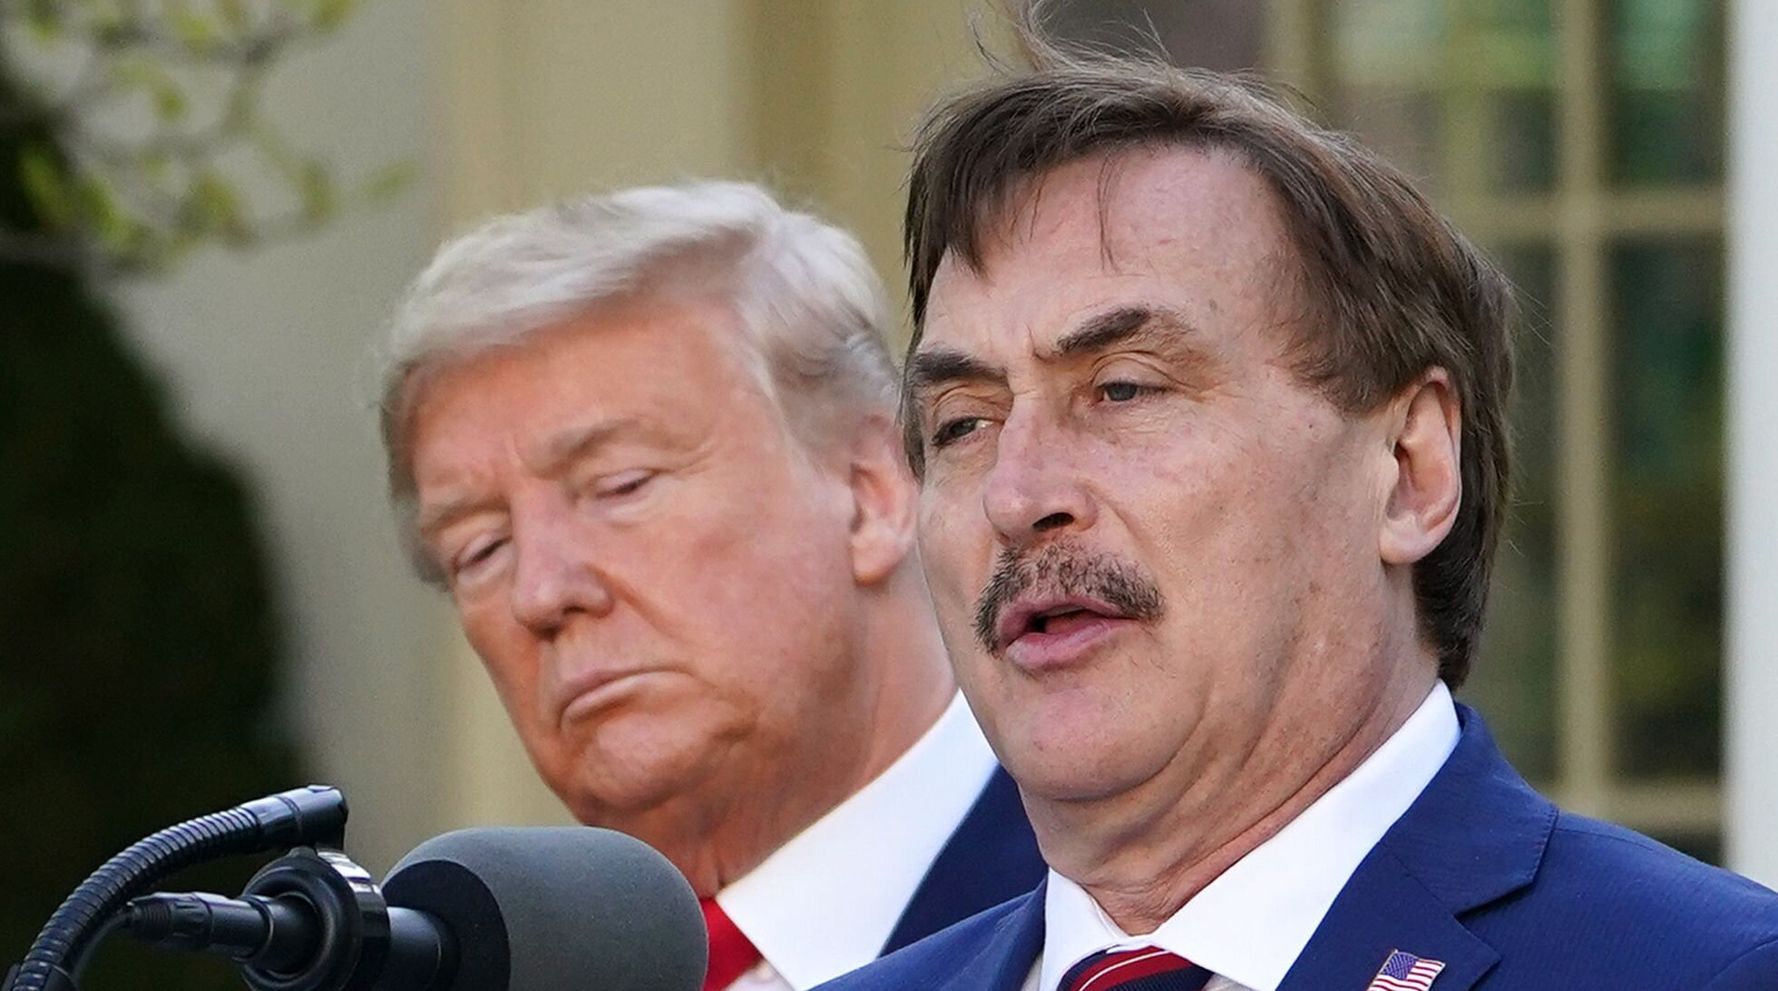 Now Mike Lindell Predicts Trump's Fantastical Reinstatement Before Year's End